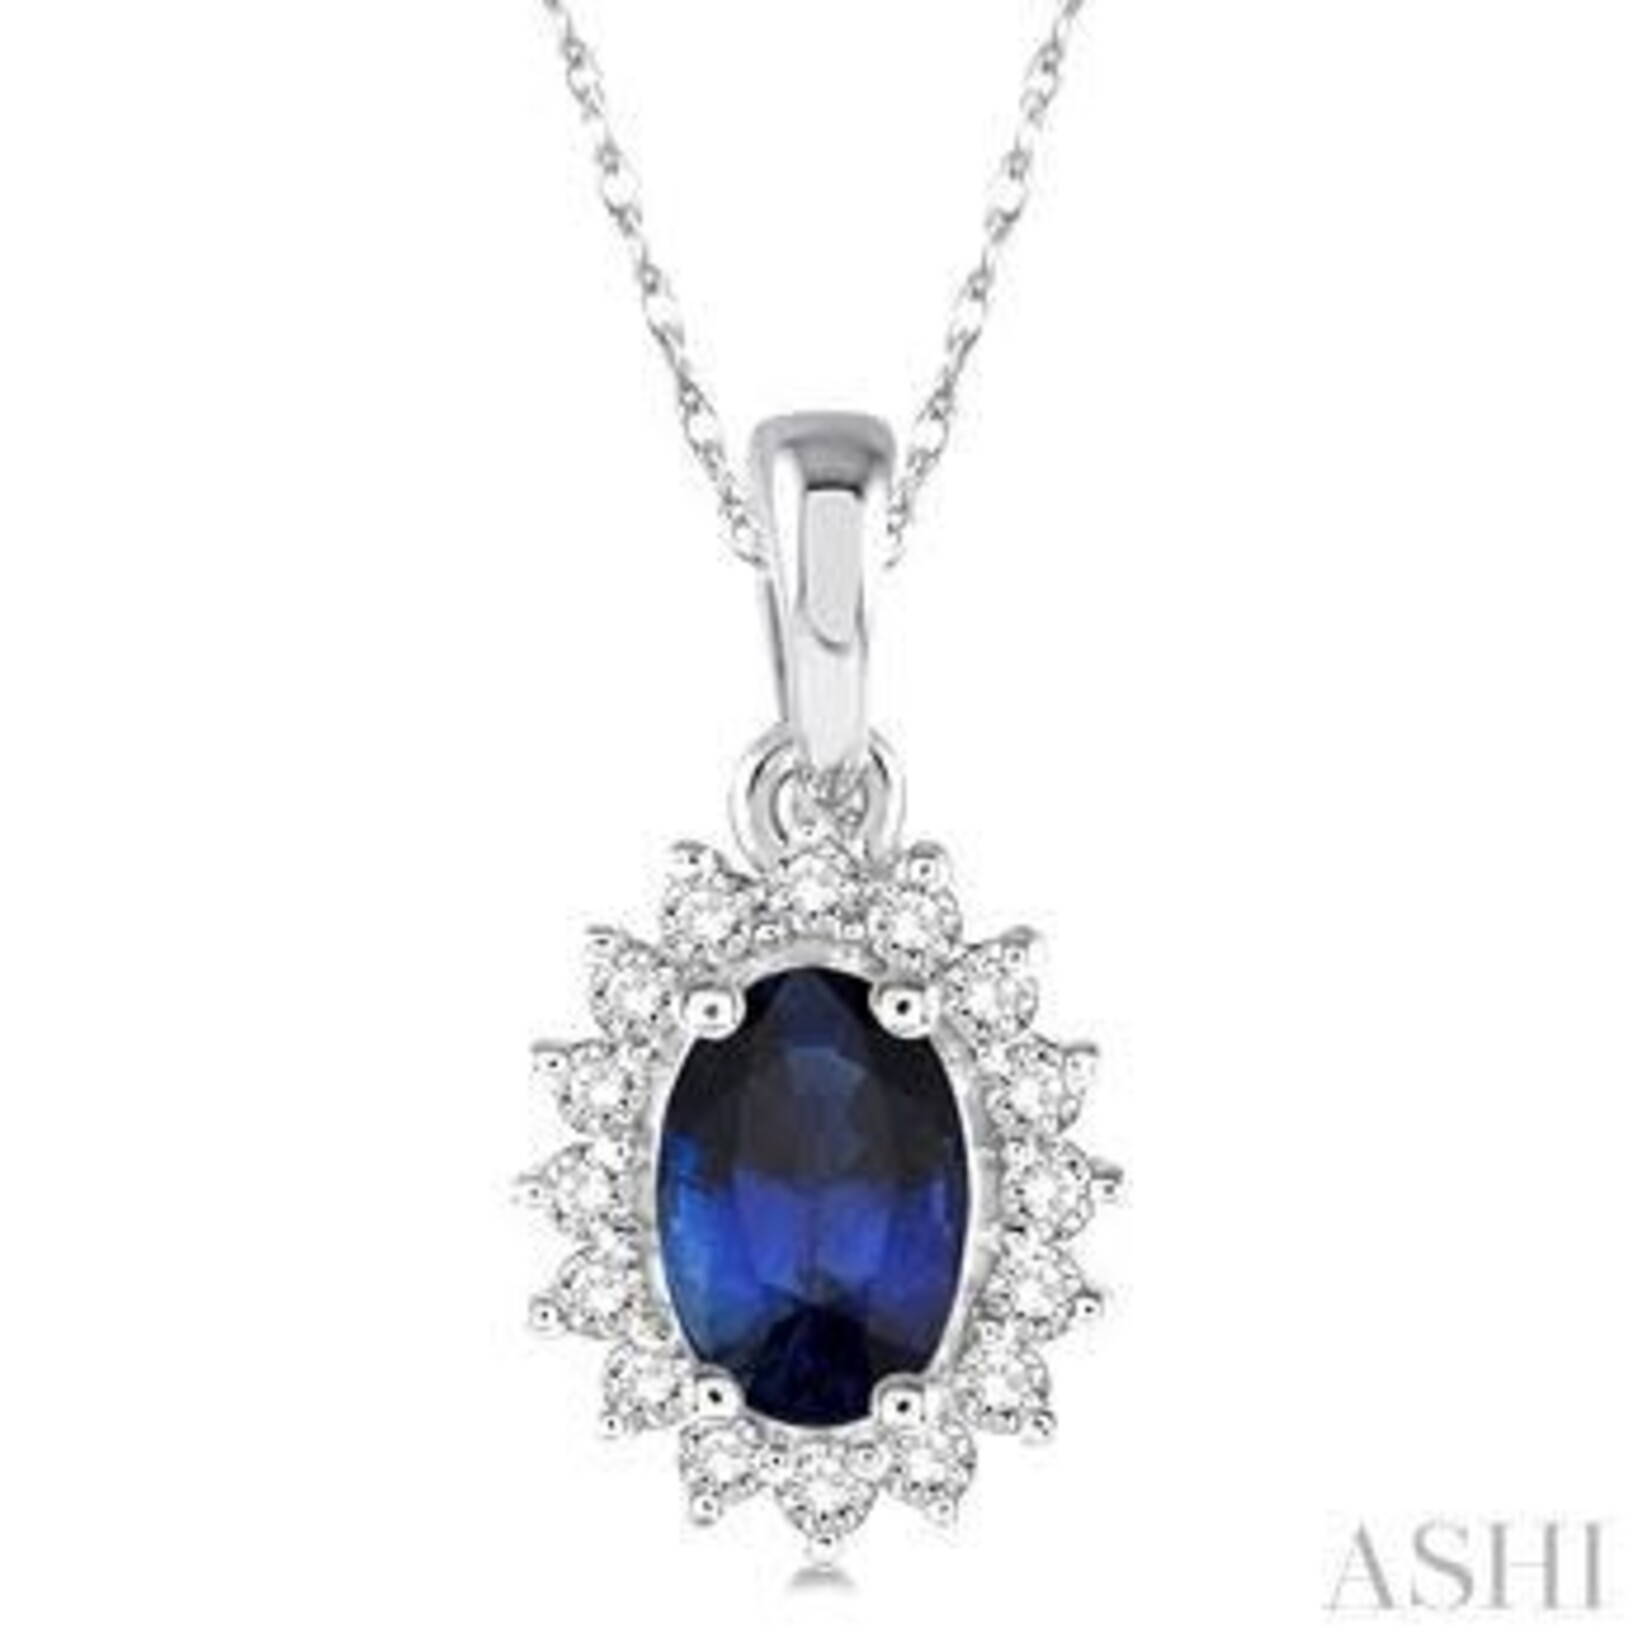 10k White Gold Oval Sapphire & Diamond Pendant with Chain